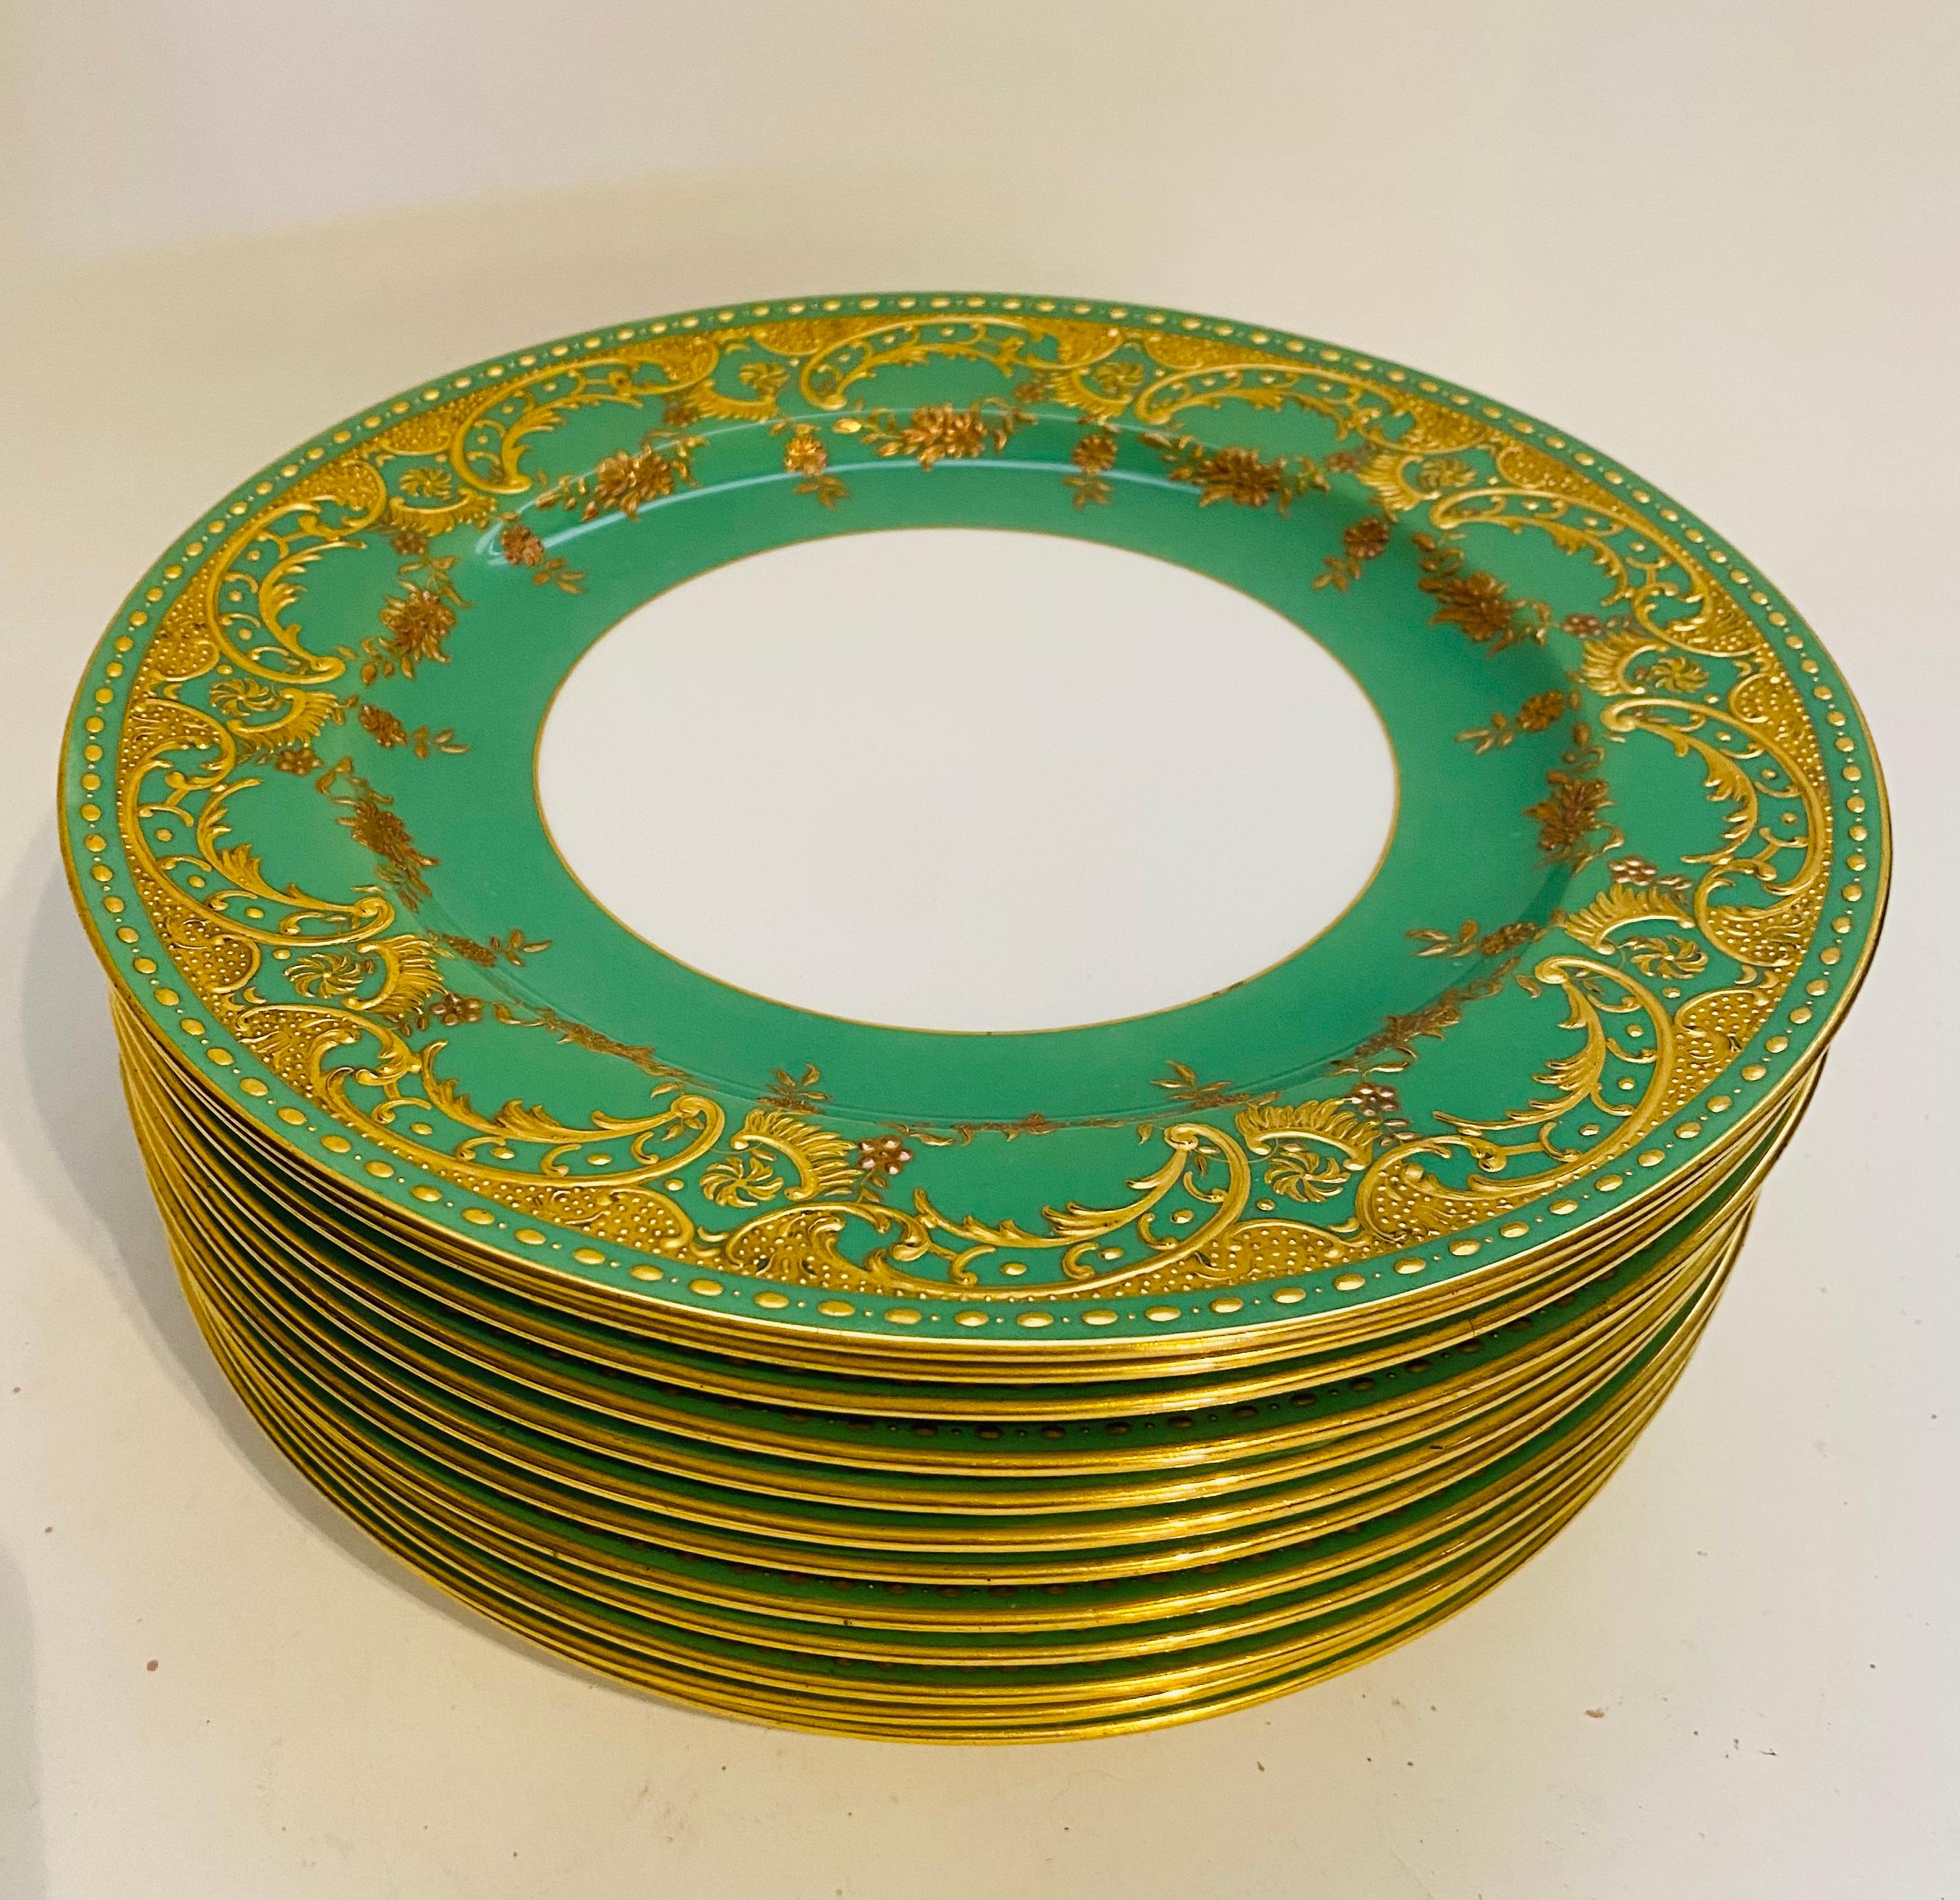 12 Heavily Gilt Encrusted Antique Green & Gold Minton England Dinner Plates In Good Condition For Sale In West Palm Beach, FL